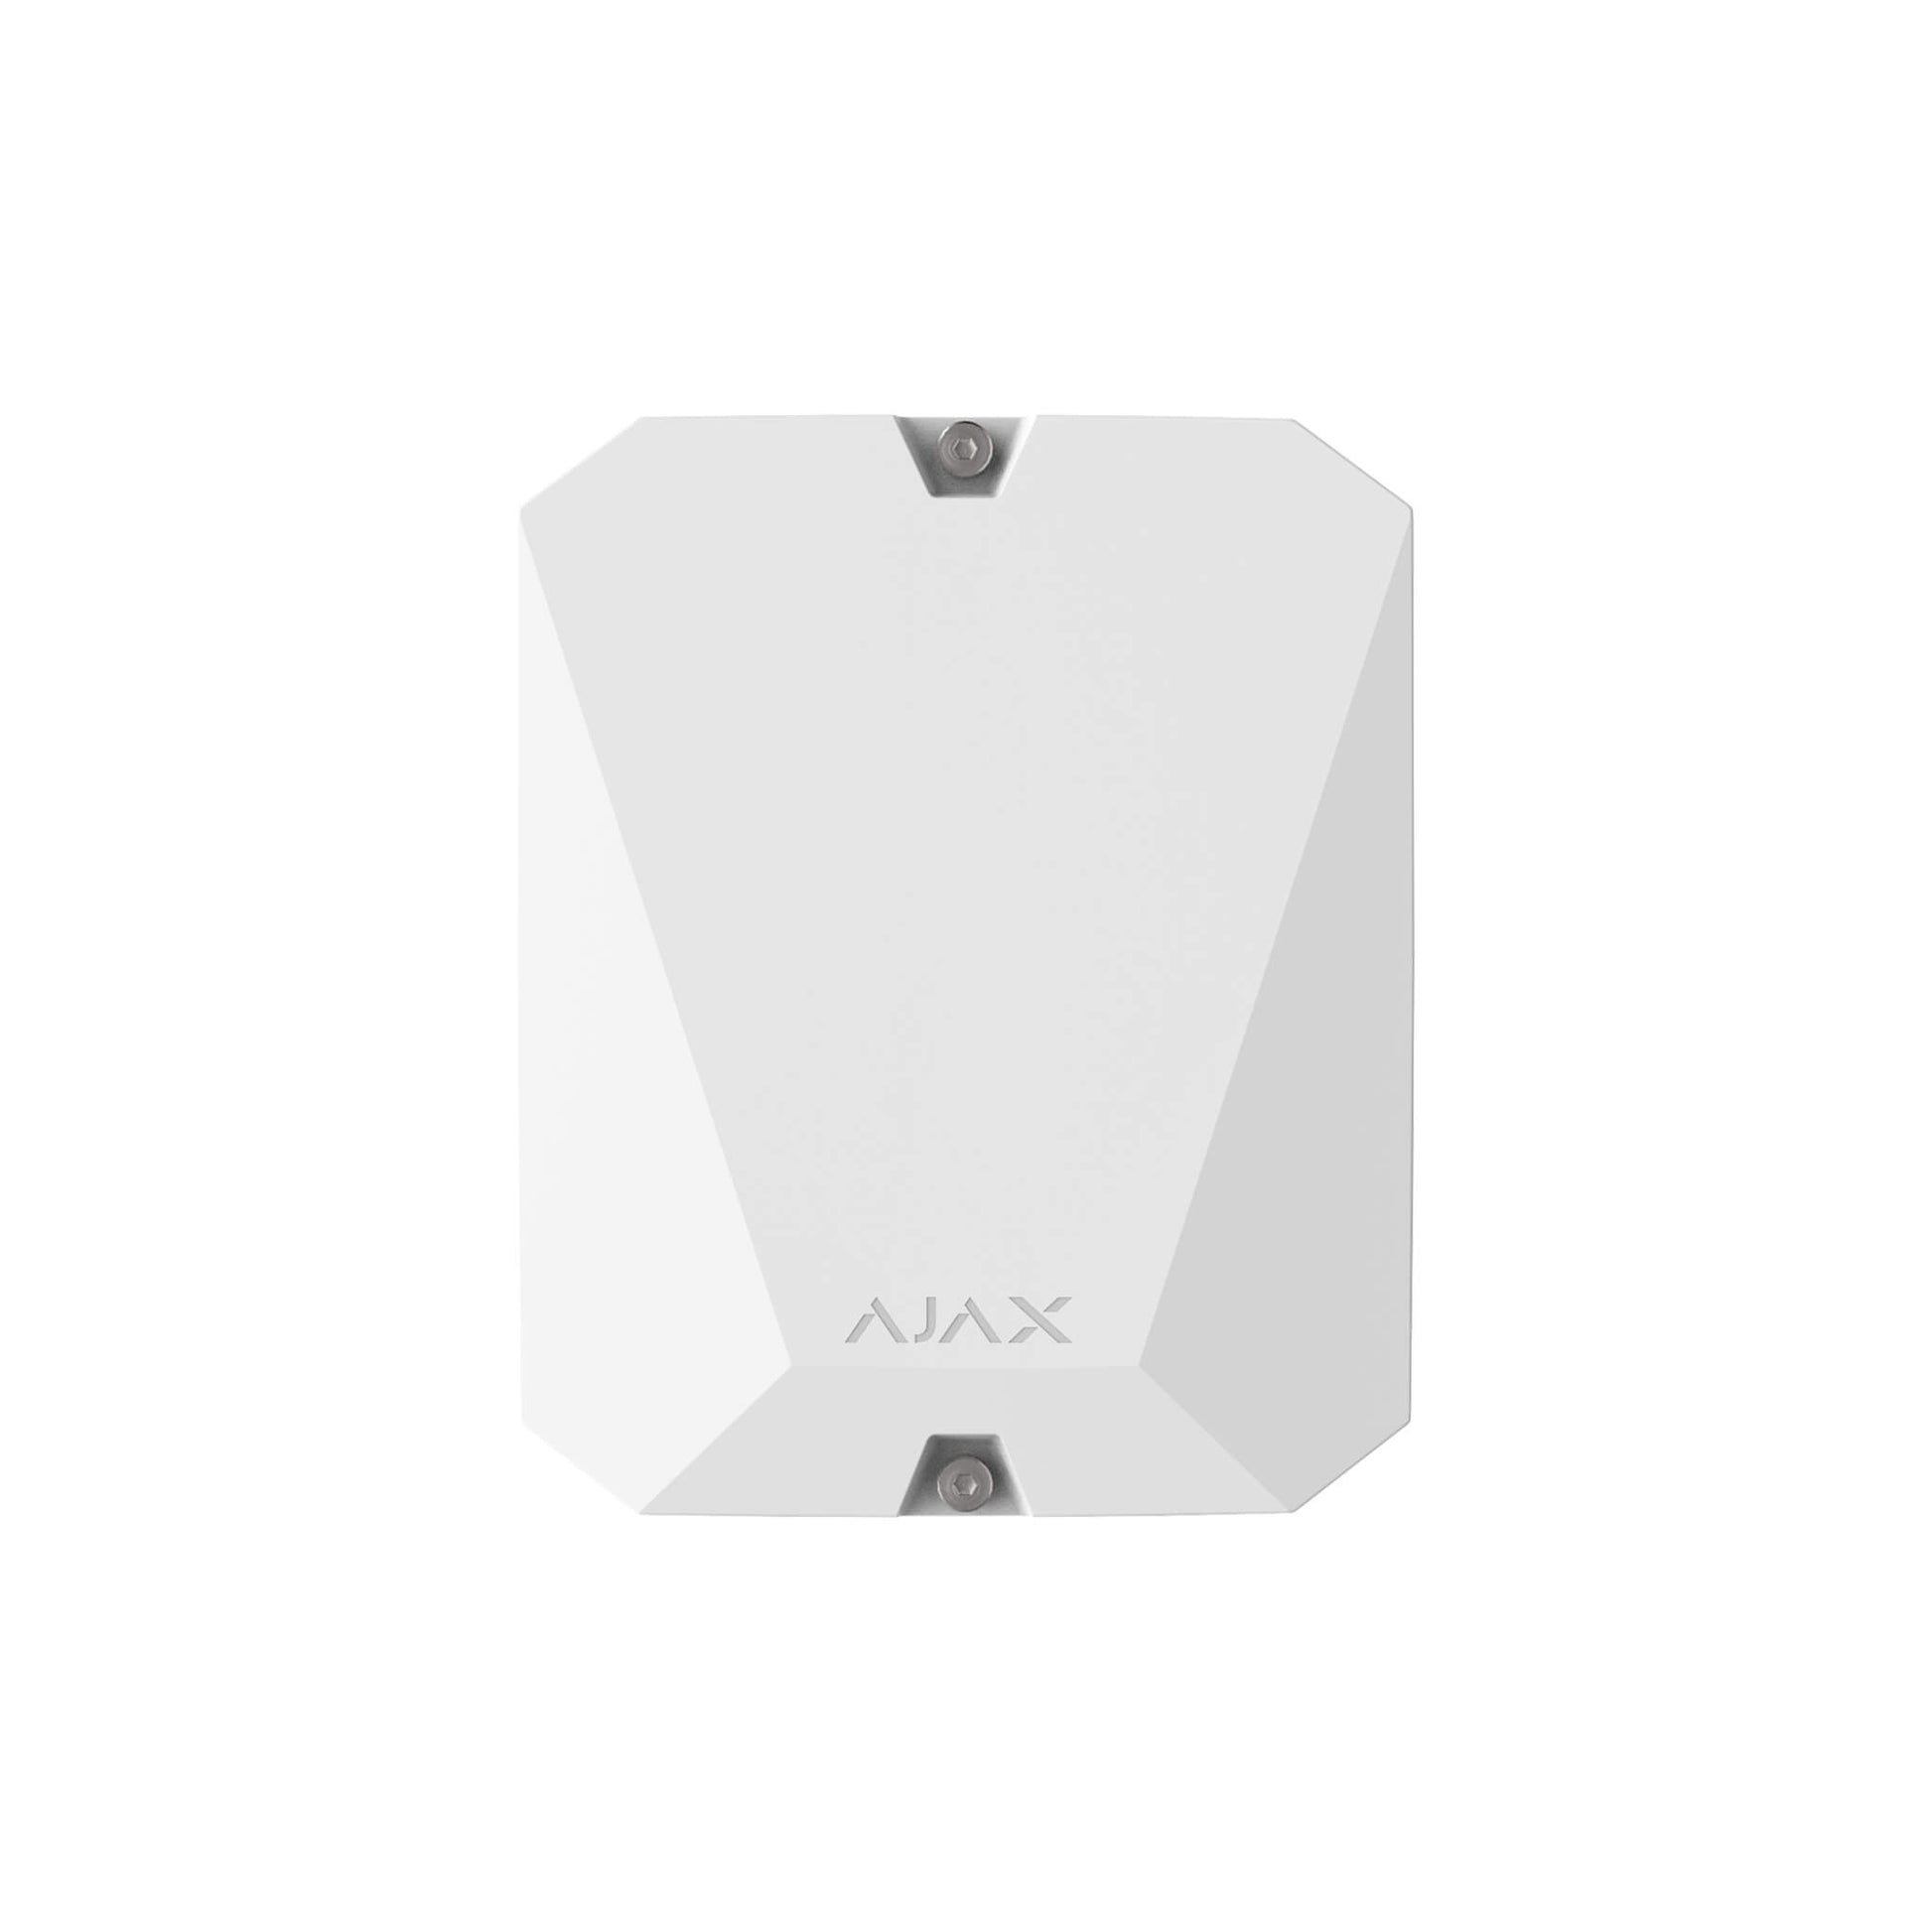 White Ajax VHF Bridge, a module for intergration of third party VHF transmitters, for smart home and business security. Ships in 196 × 238 × 100 mm. Weighs 850grams. For indoor installations ships without a battery. Front view of device.